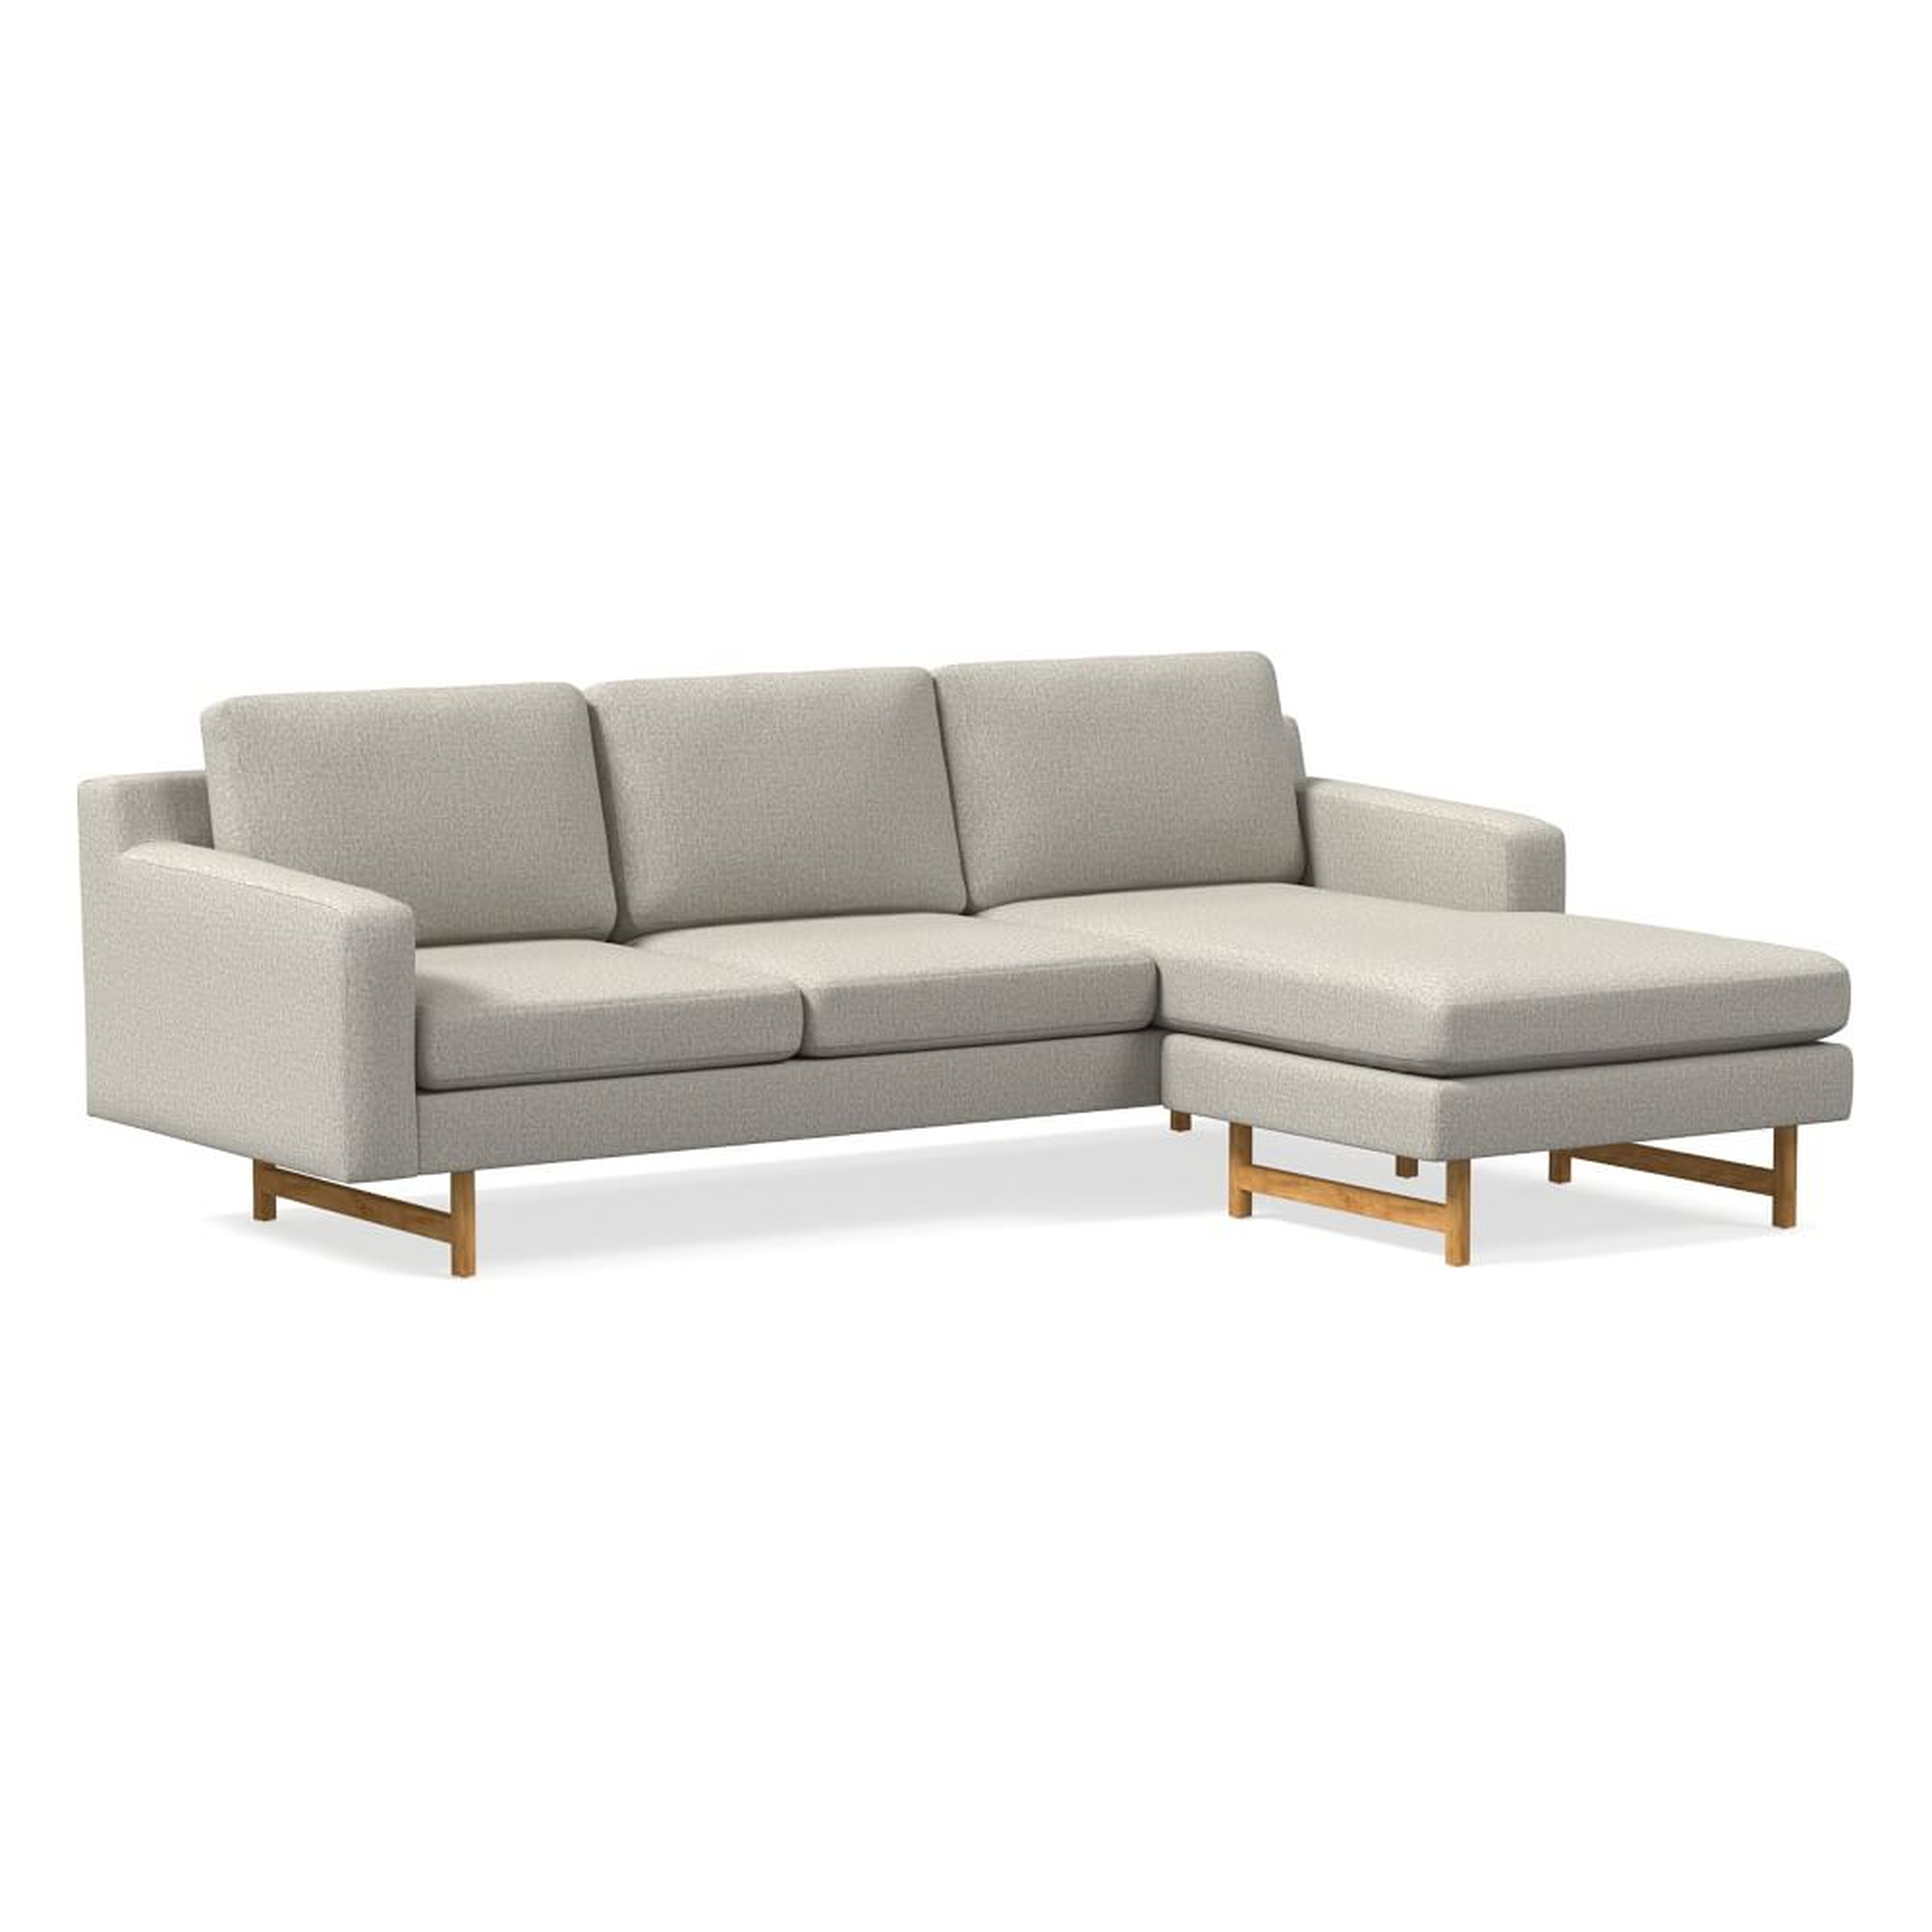 Eddy 90" Reversible Sectional, Twill, Dove, Almond - West Elm